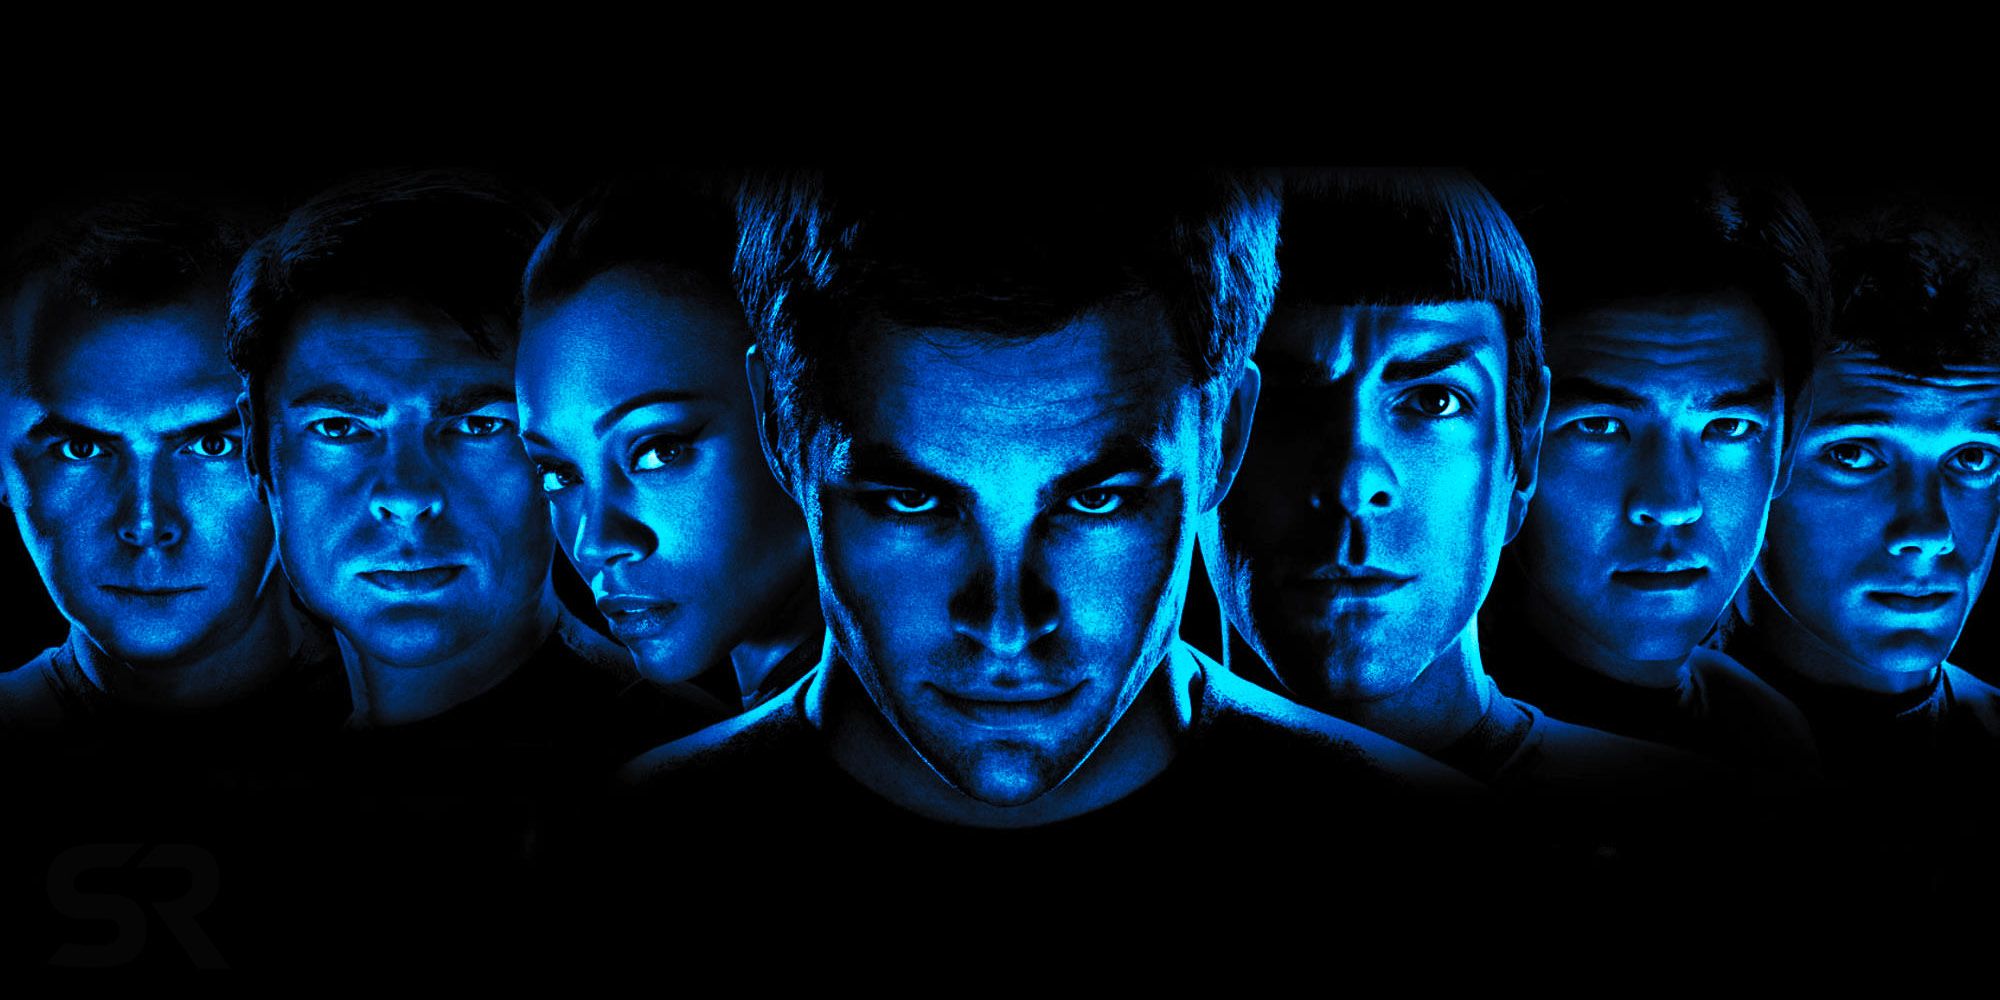 Star trek 2009 cast and characters